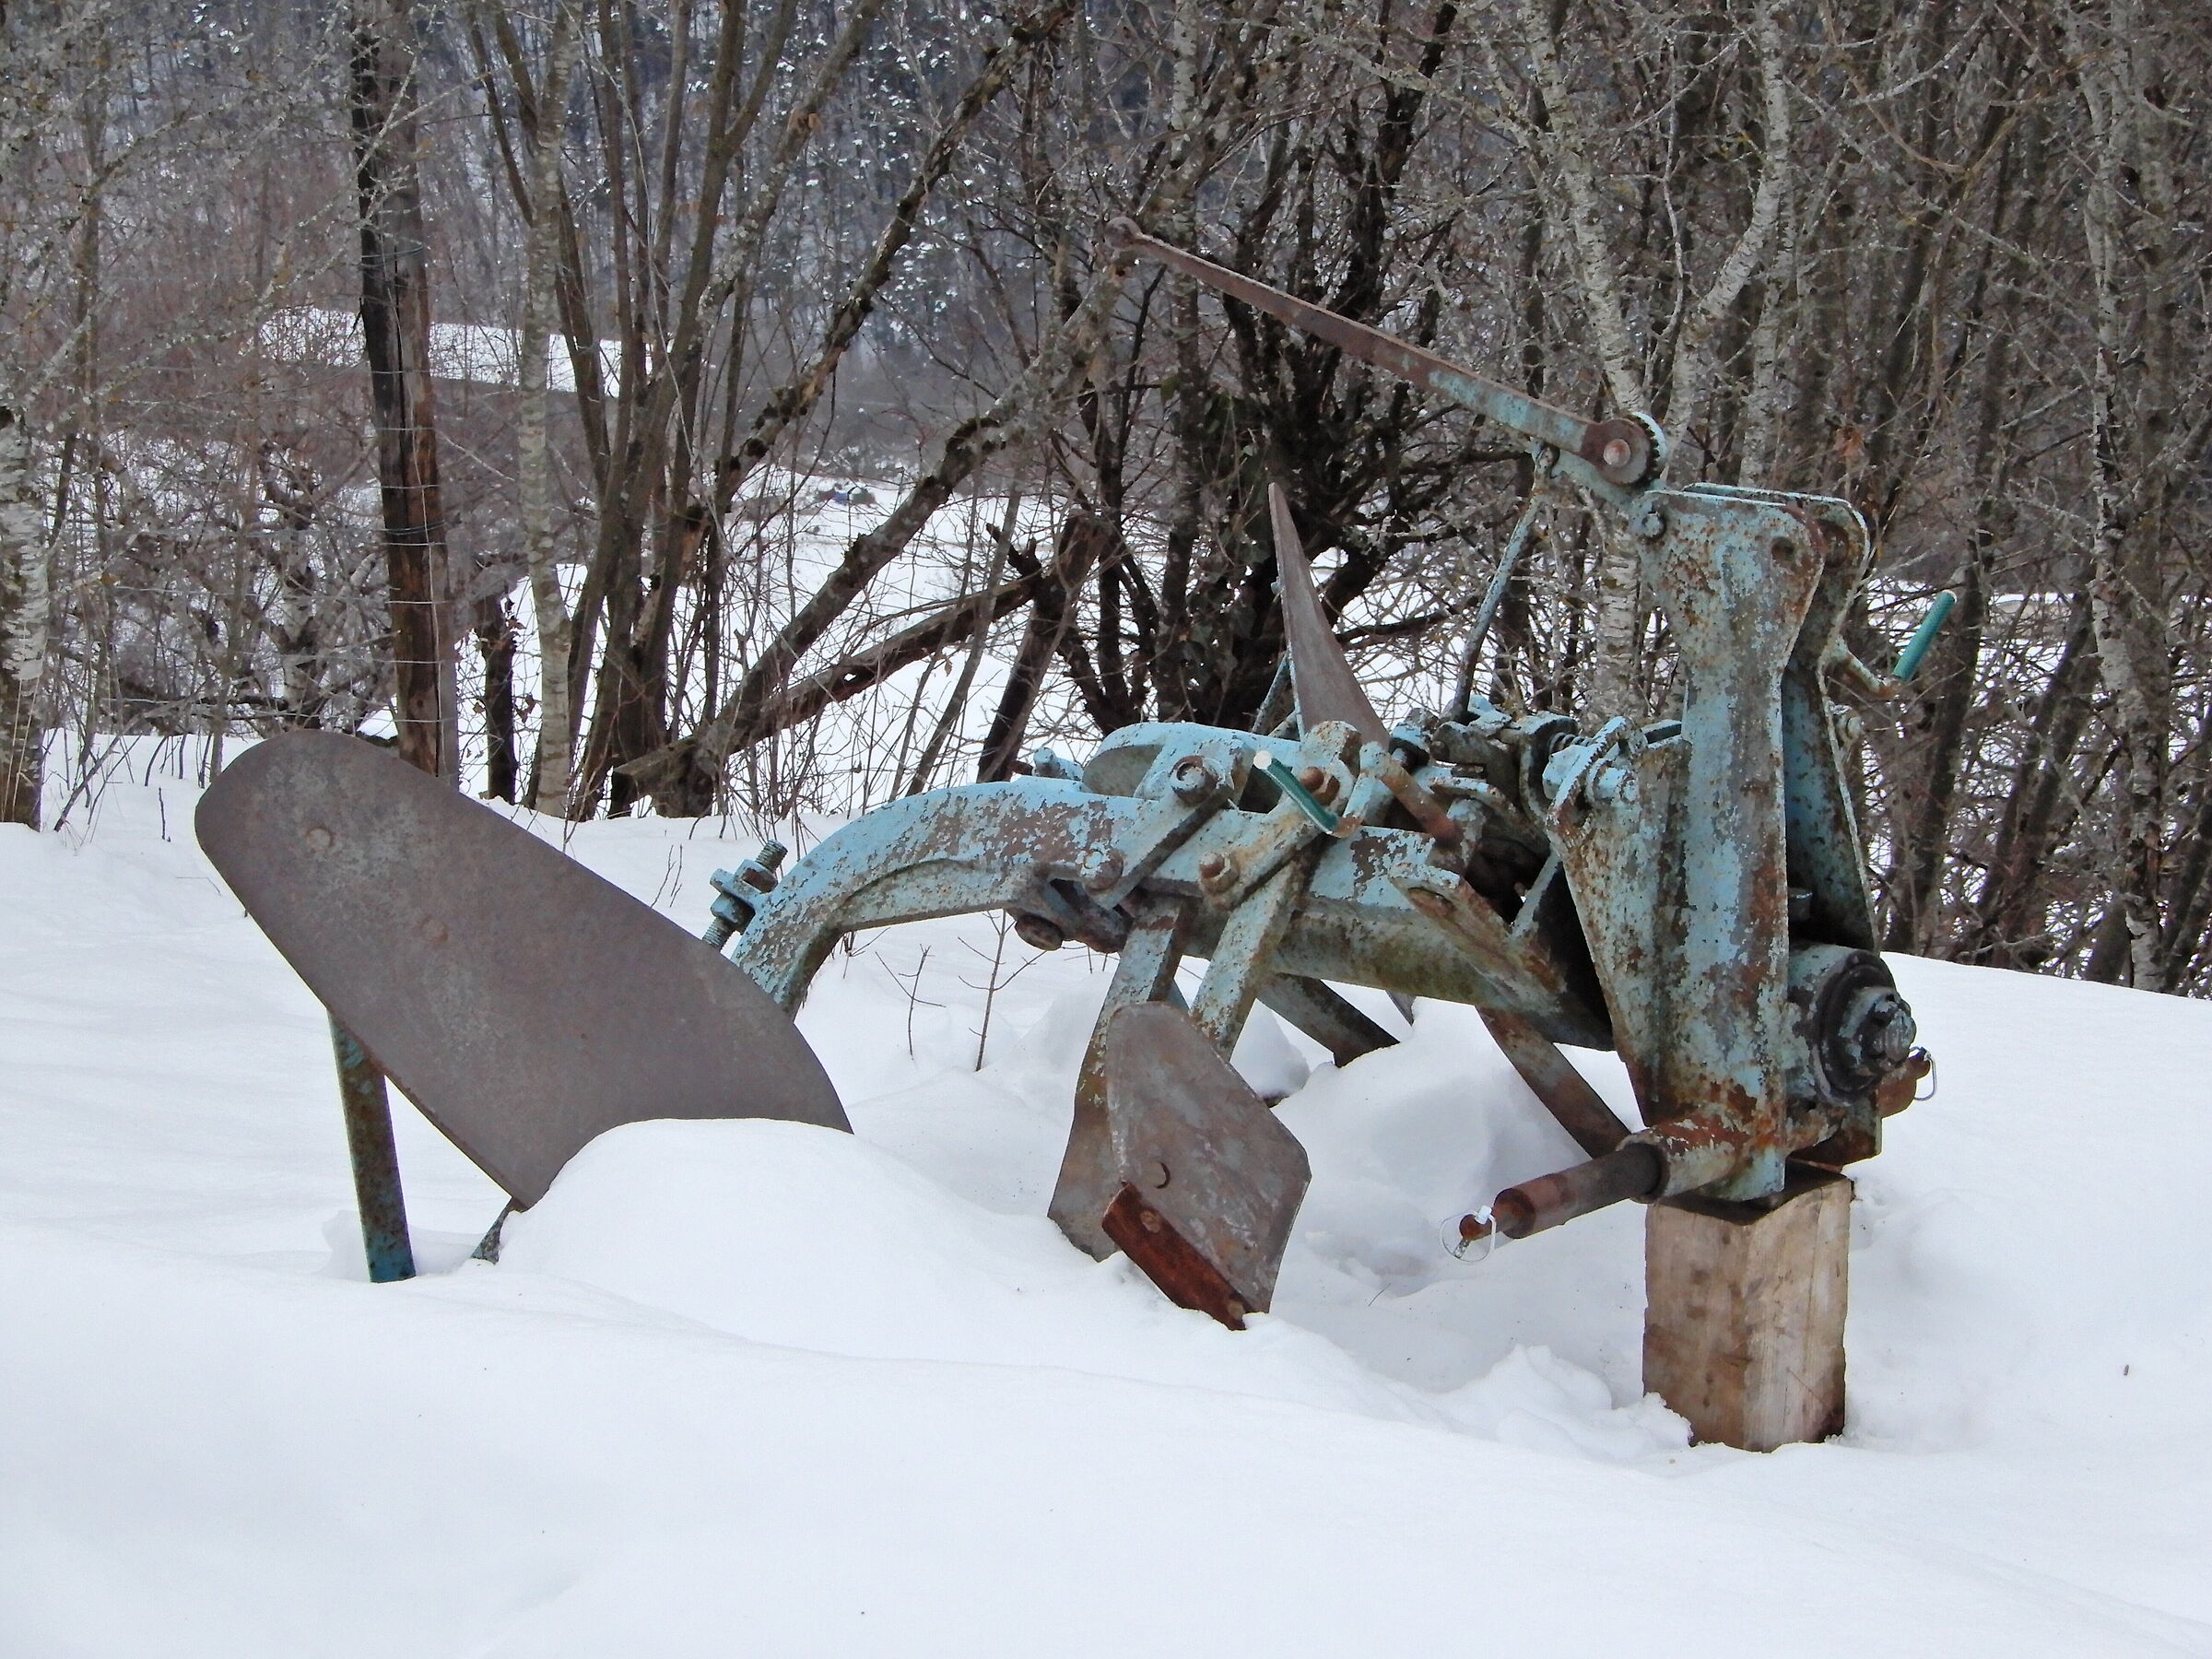 The old plow - in winter rest...